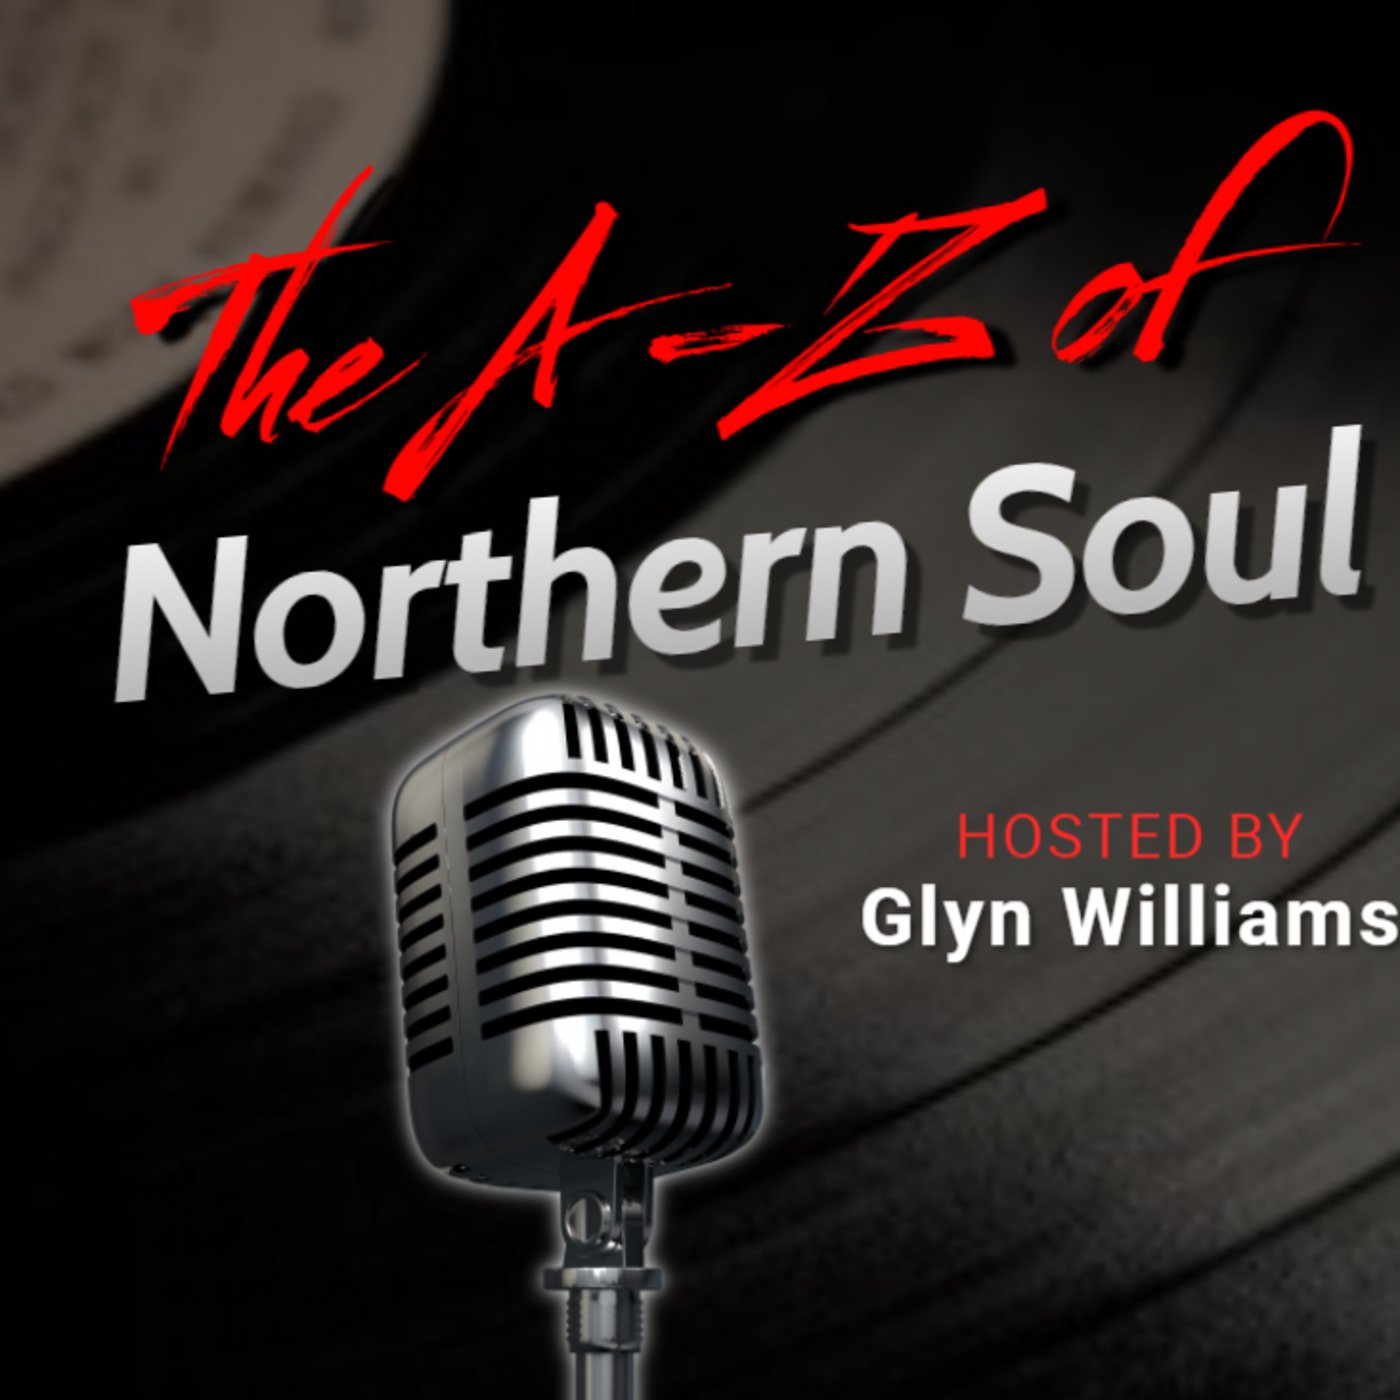 The A-Z of Northern Soul E089